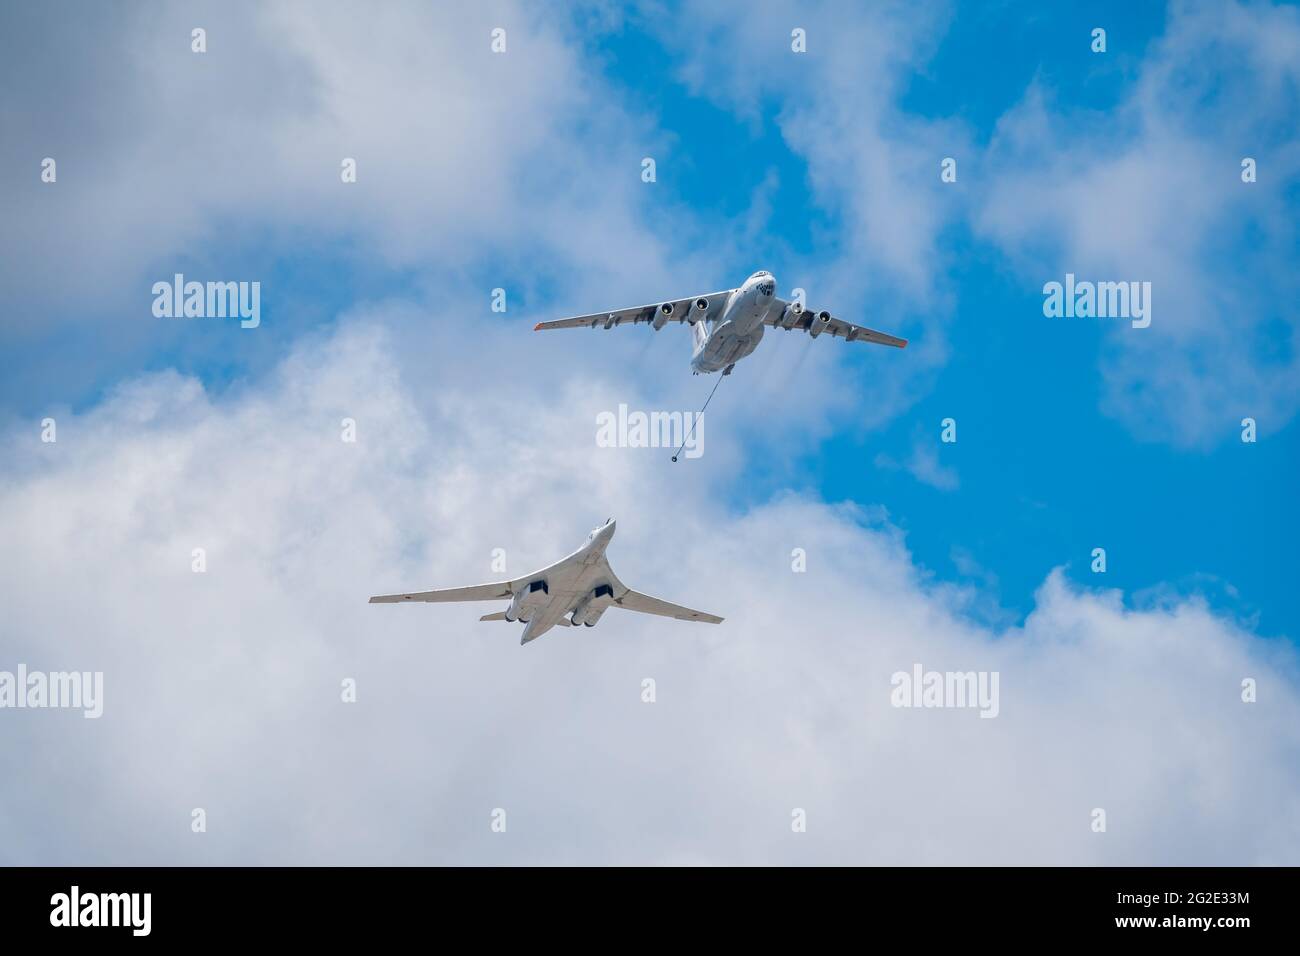 Moscow, Russia - May, 05, 2021: The group of supersonic strategic bomber of long-range aviation Tu-160 and flying tanker Il-78m fly over the Red Squar Stock Photo